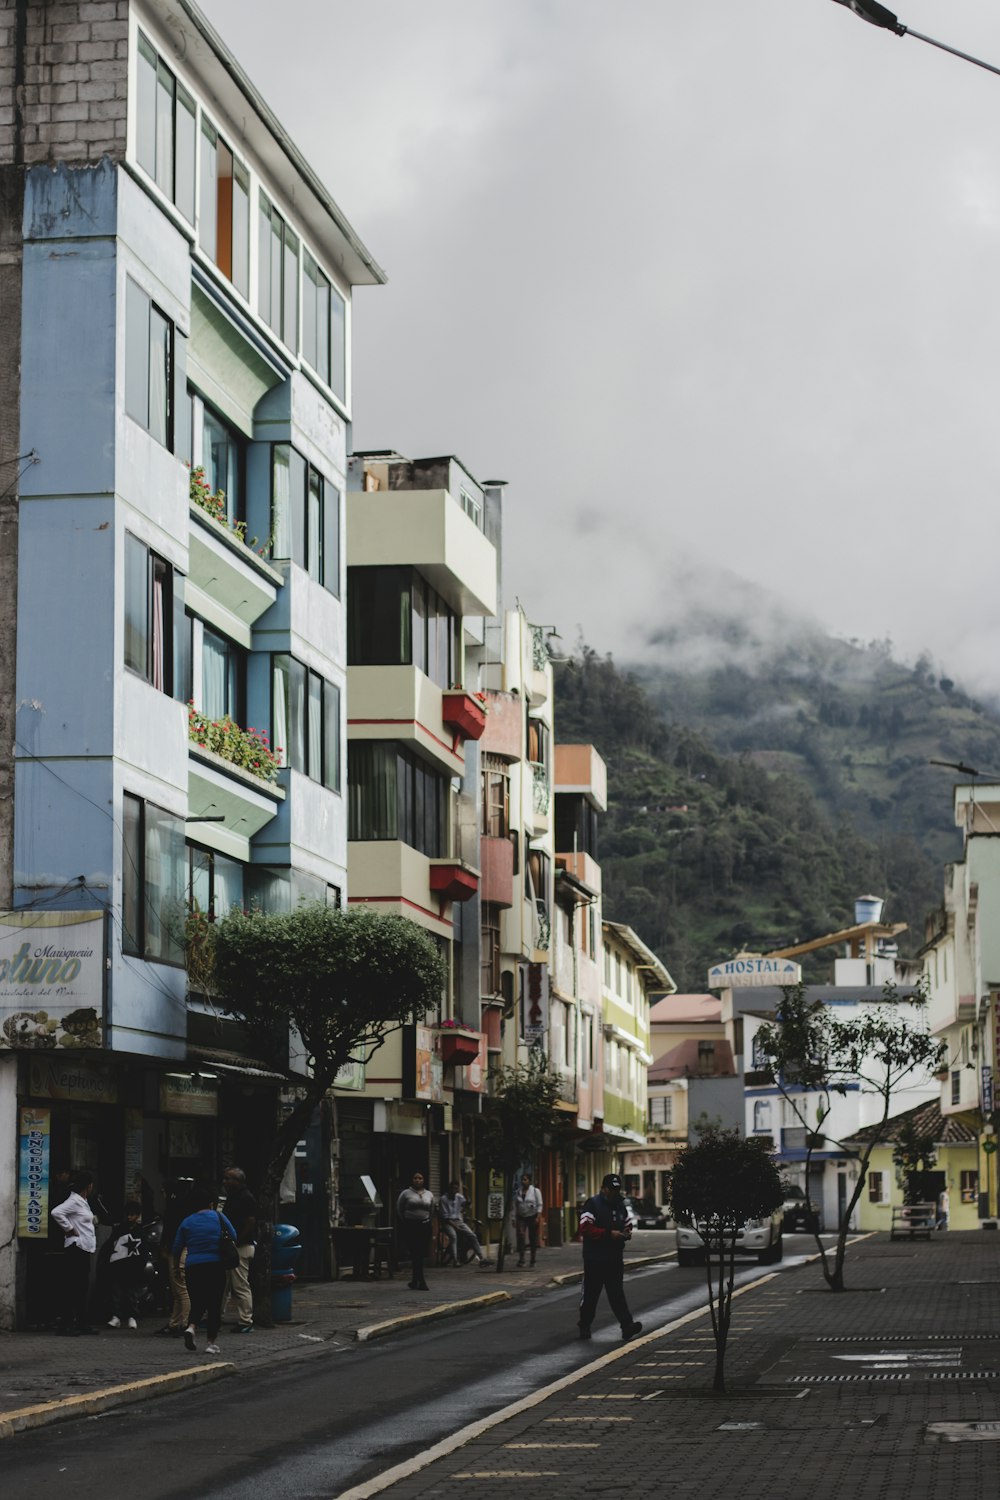 a street with buildings and people on it with a mountain in the background